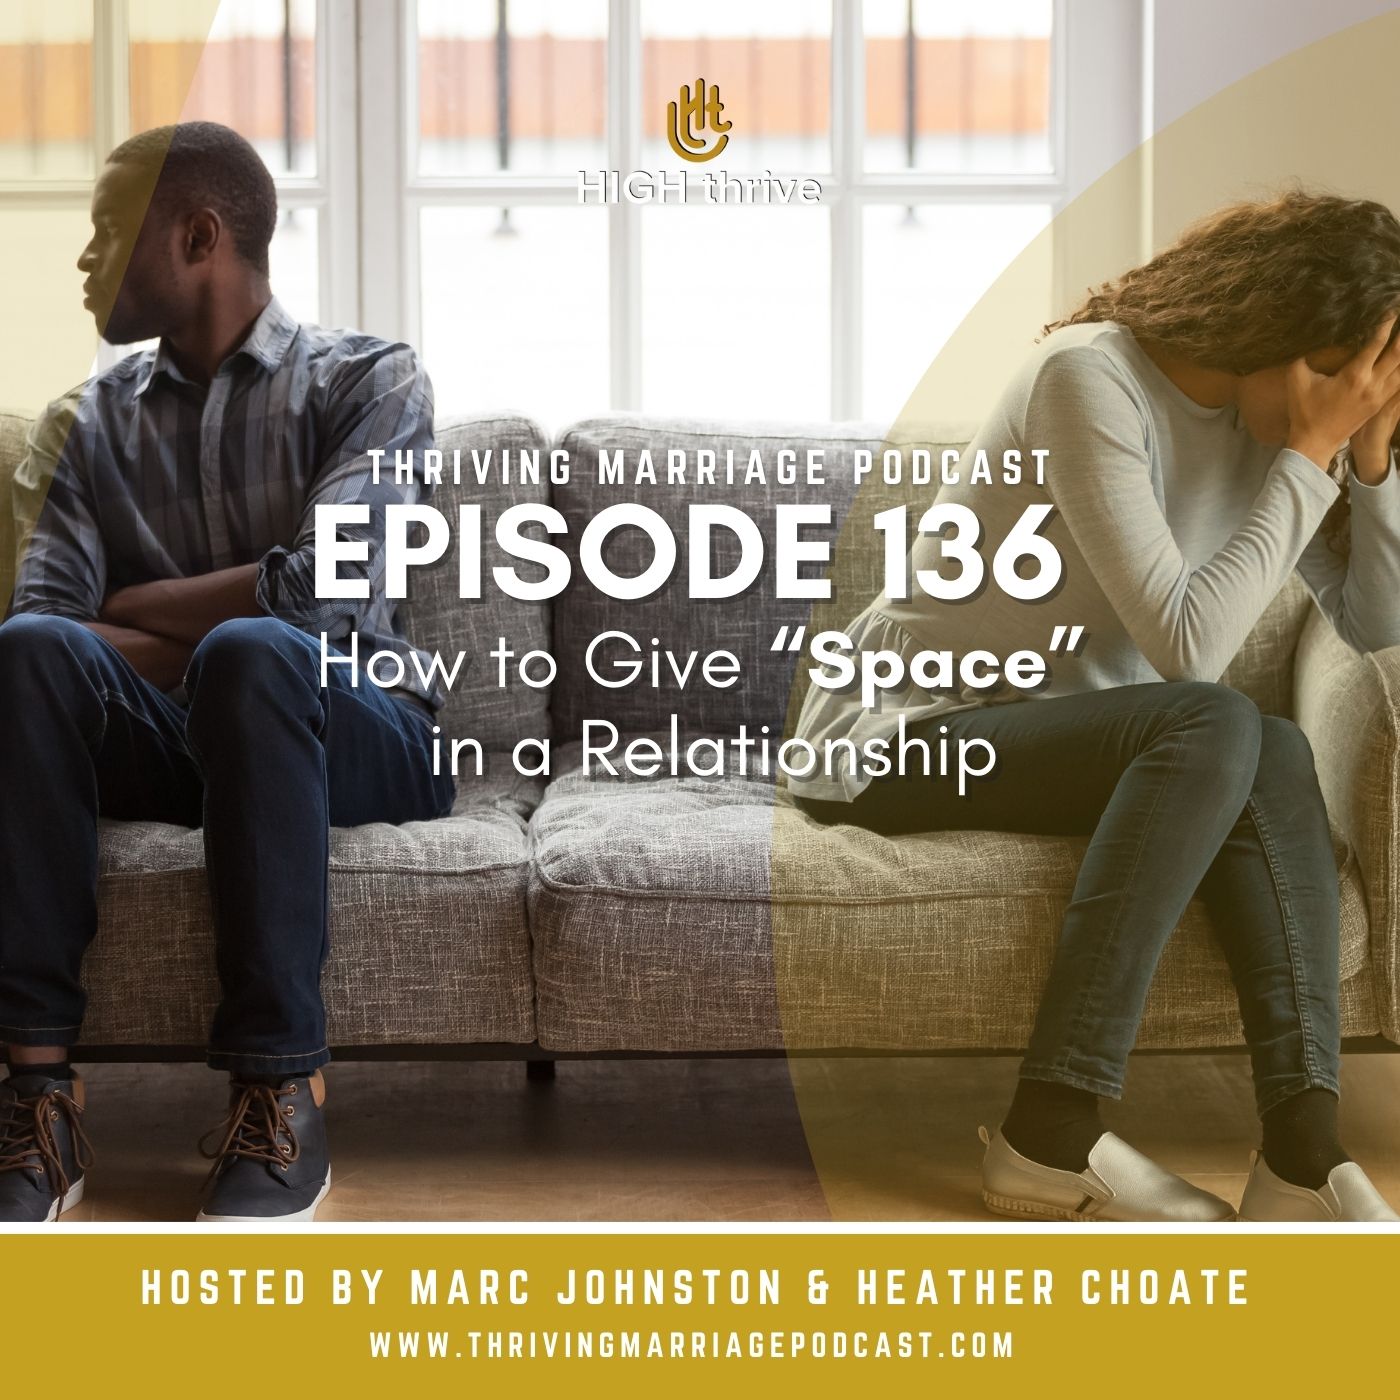 Episode 135: How to Give “Space” in a Relationship